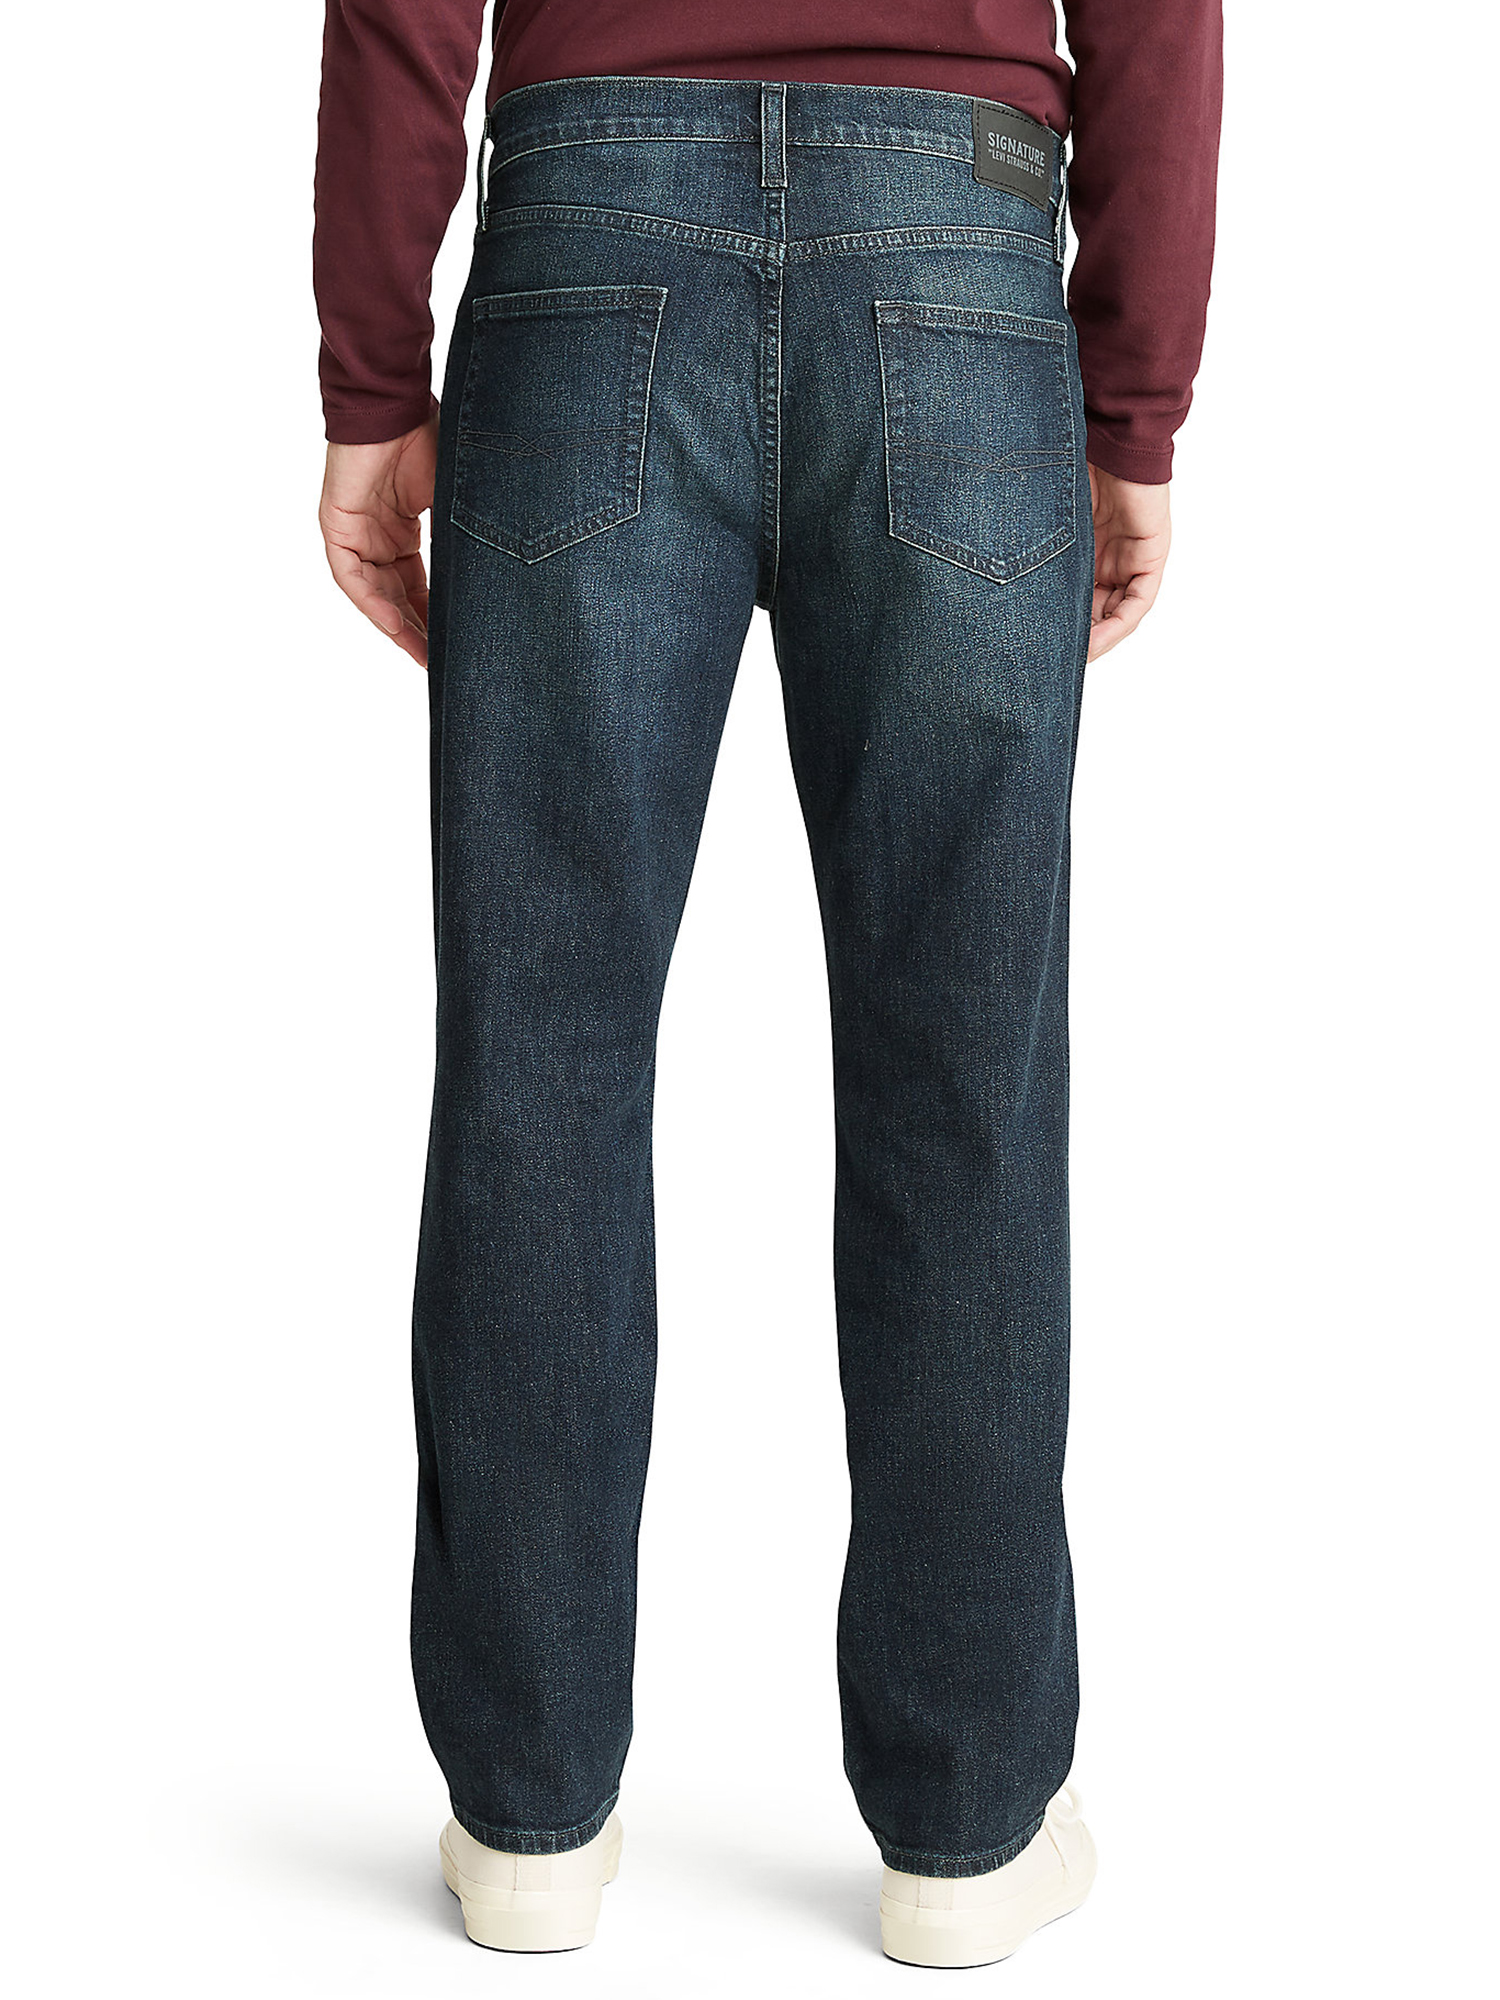 Signature by Levi Strauss & Co. Men's and Big and Tall Athletic Fit Jeans - image 2 of 7